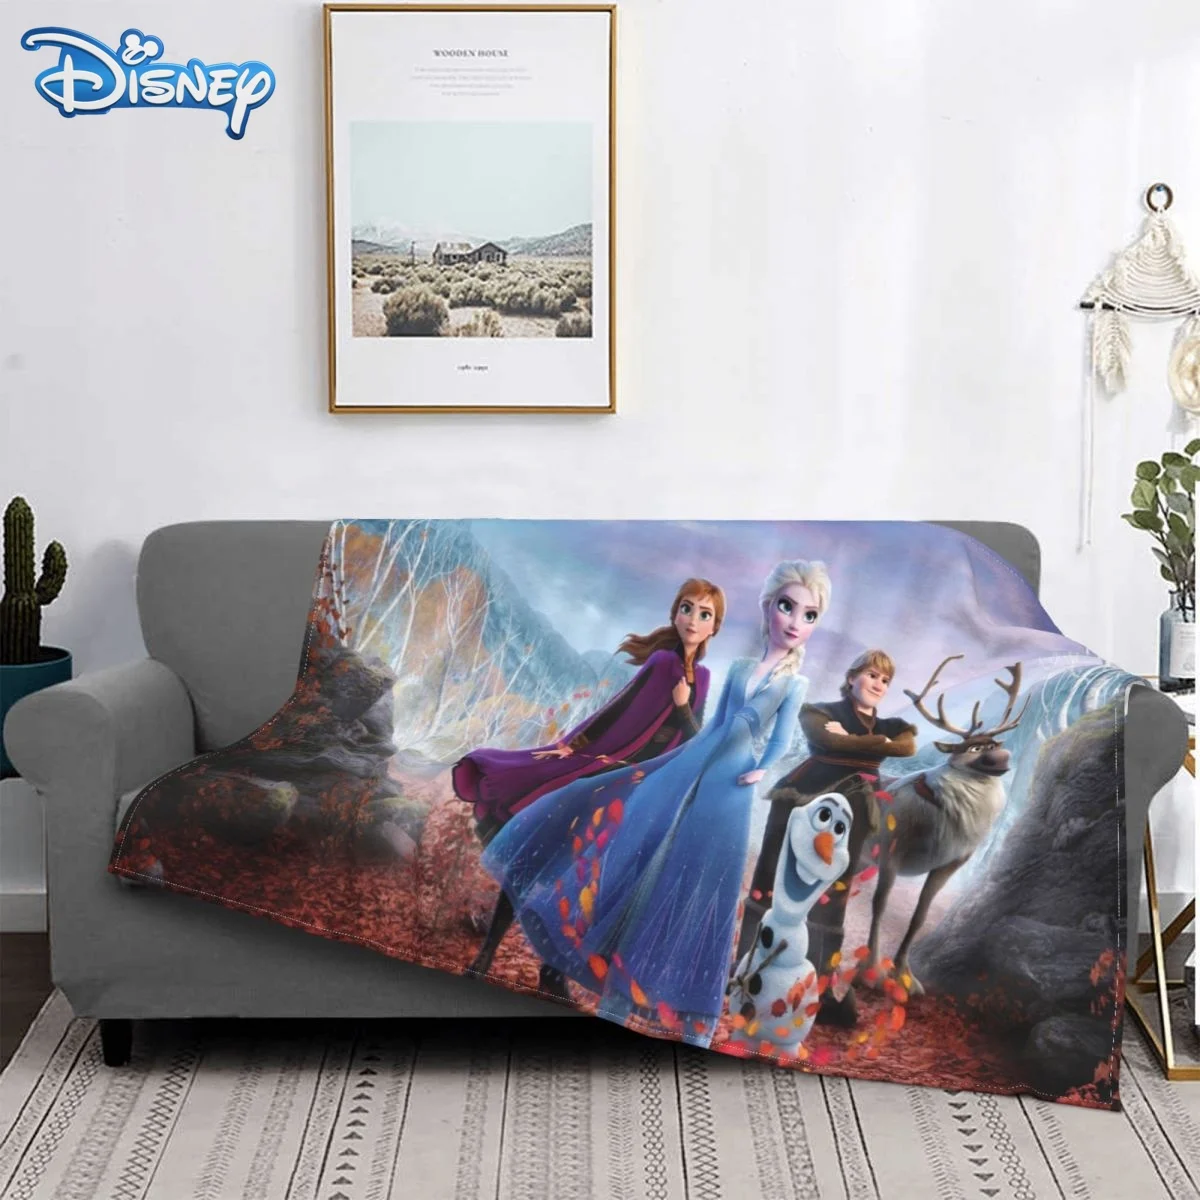 

Disney Frozen Cartoon Blanket Plush for Kids Adults Print warm Sherpa flannel Bedspread Blanket Throw for Sofa Bed Cover